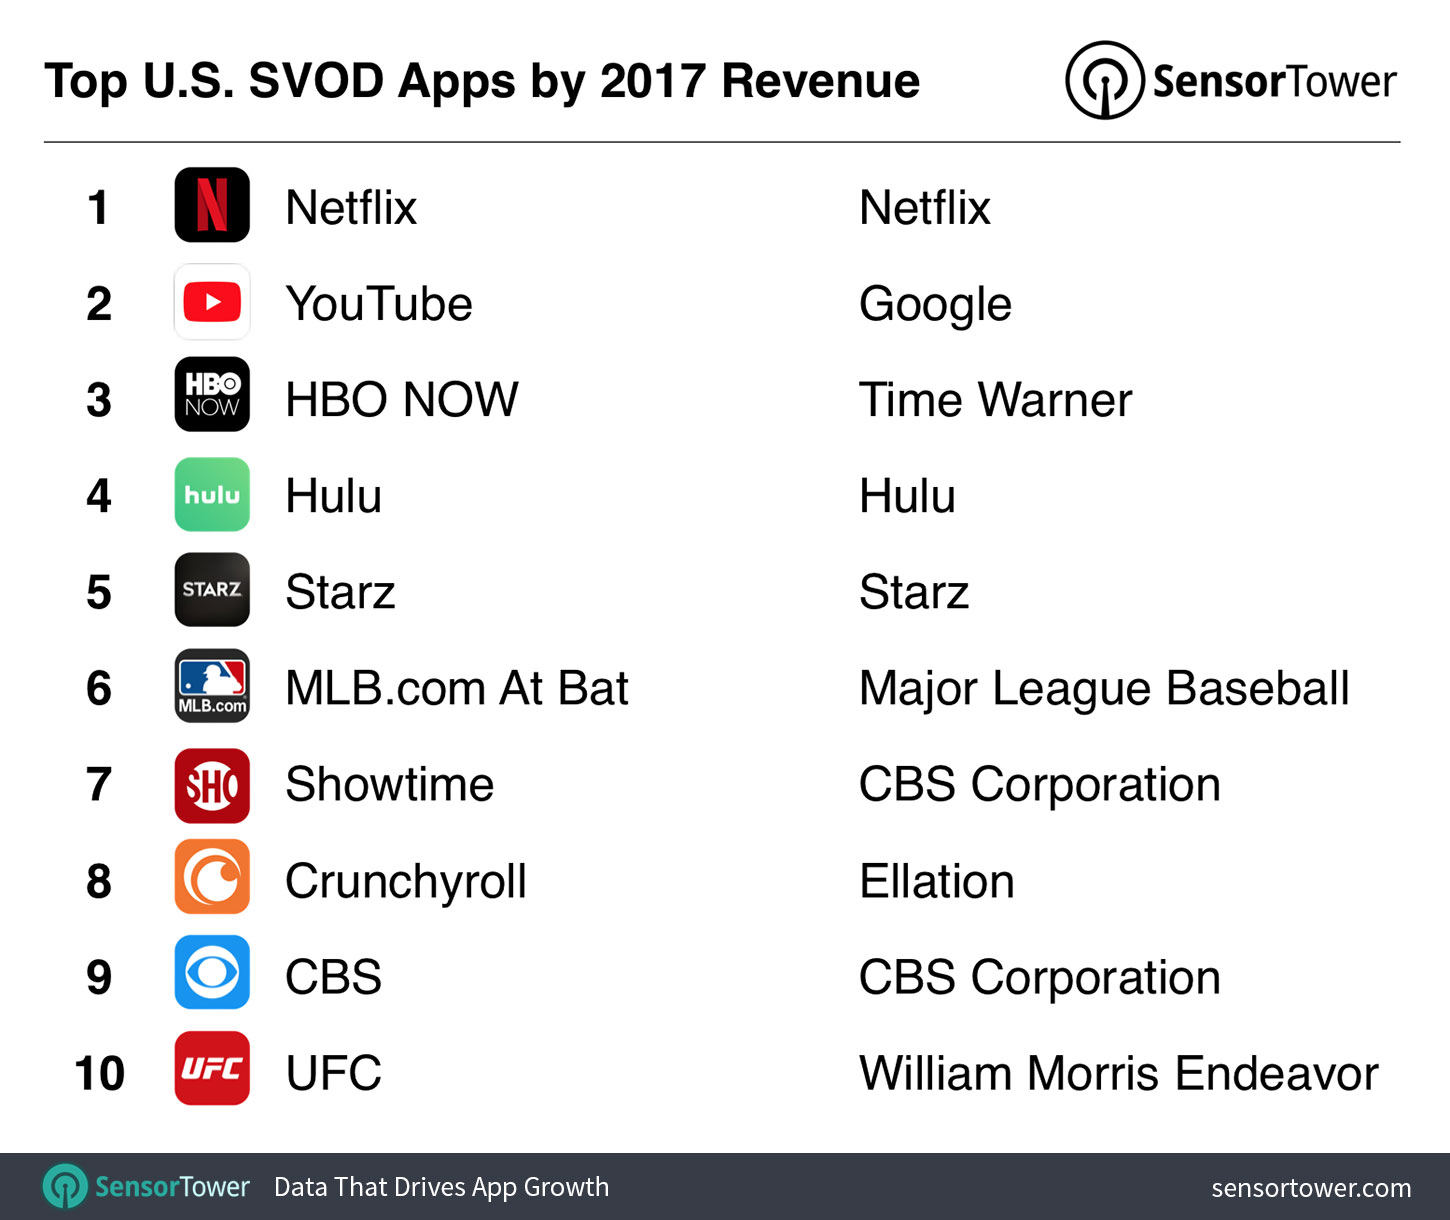 Top 10 U.S. SVOD Apps by Revenue for 2017